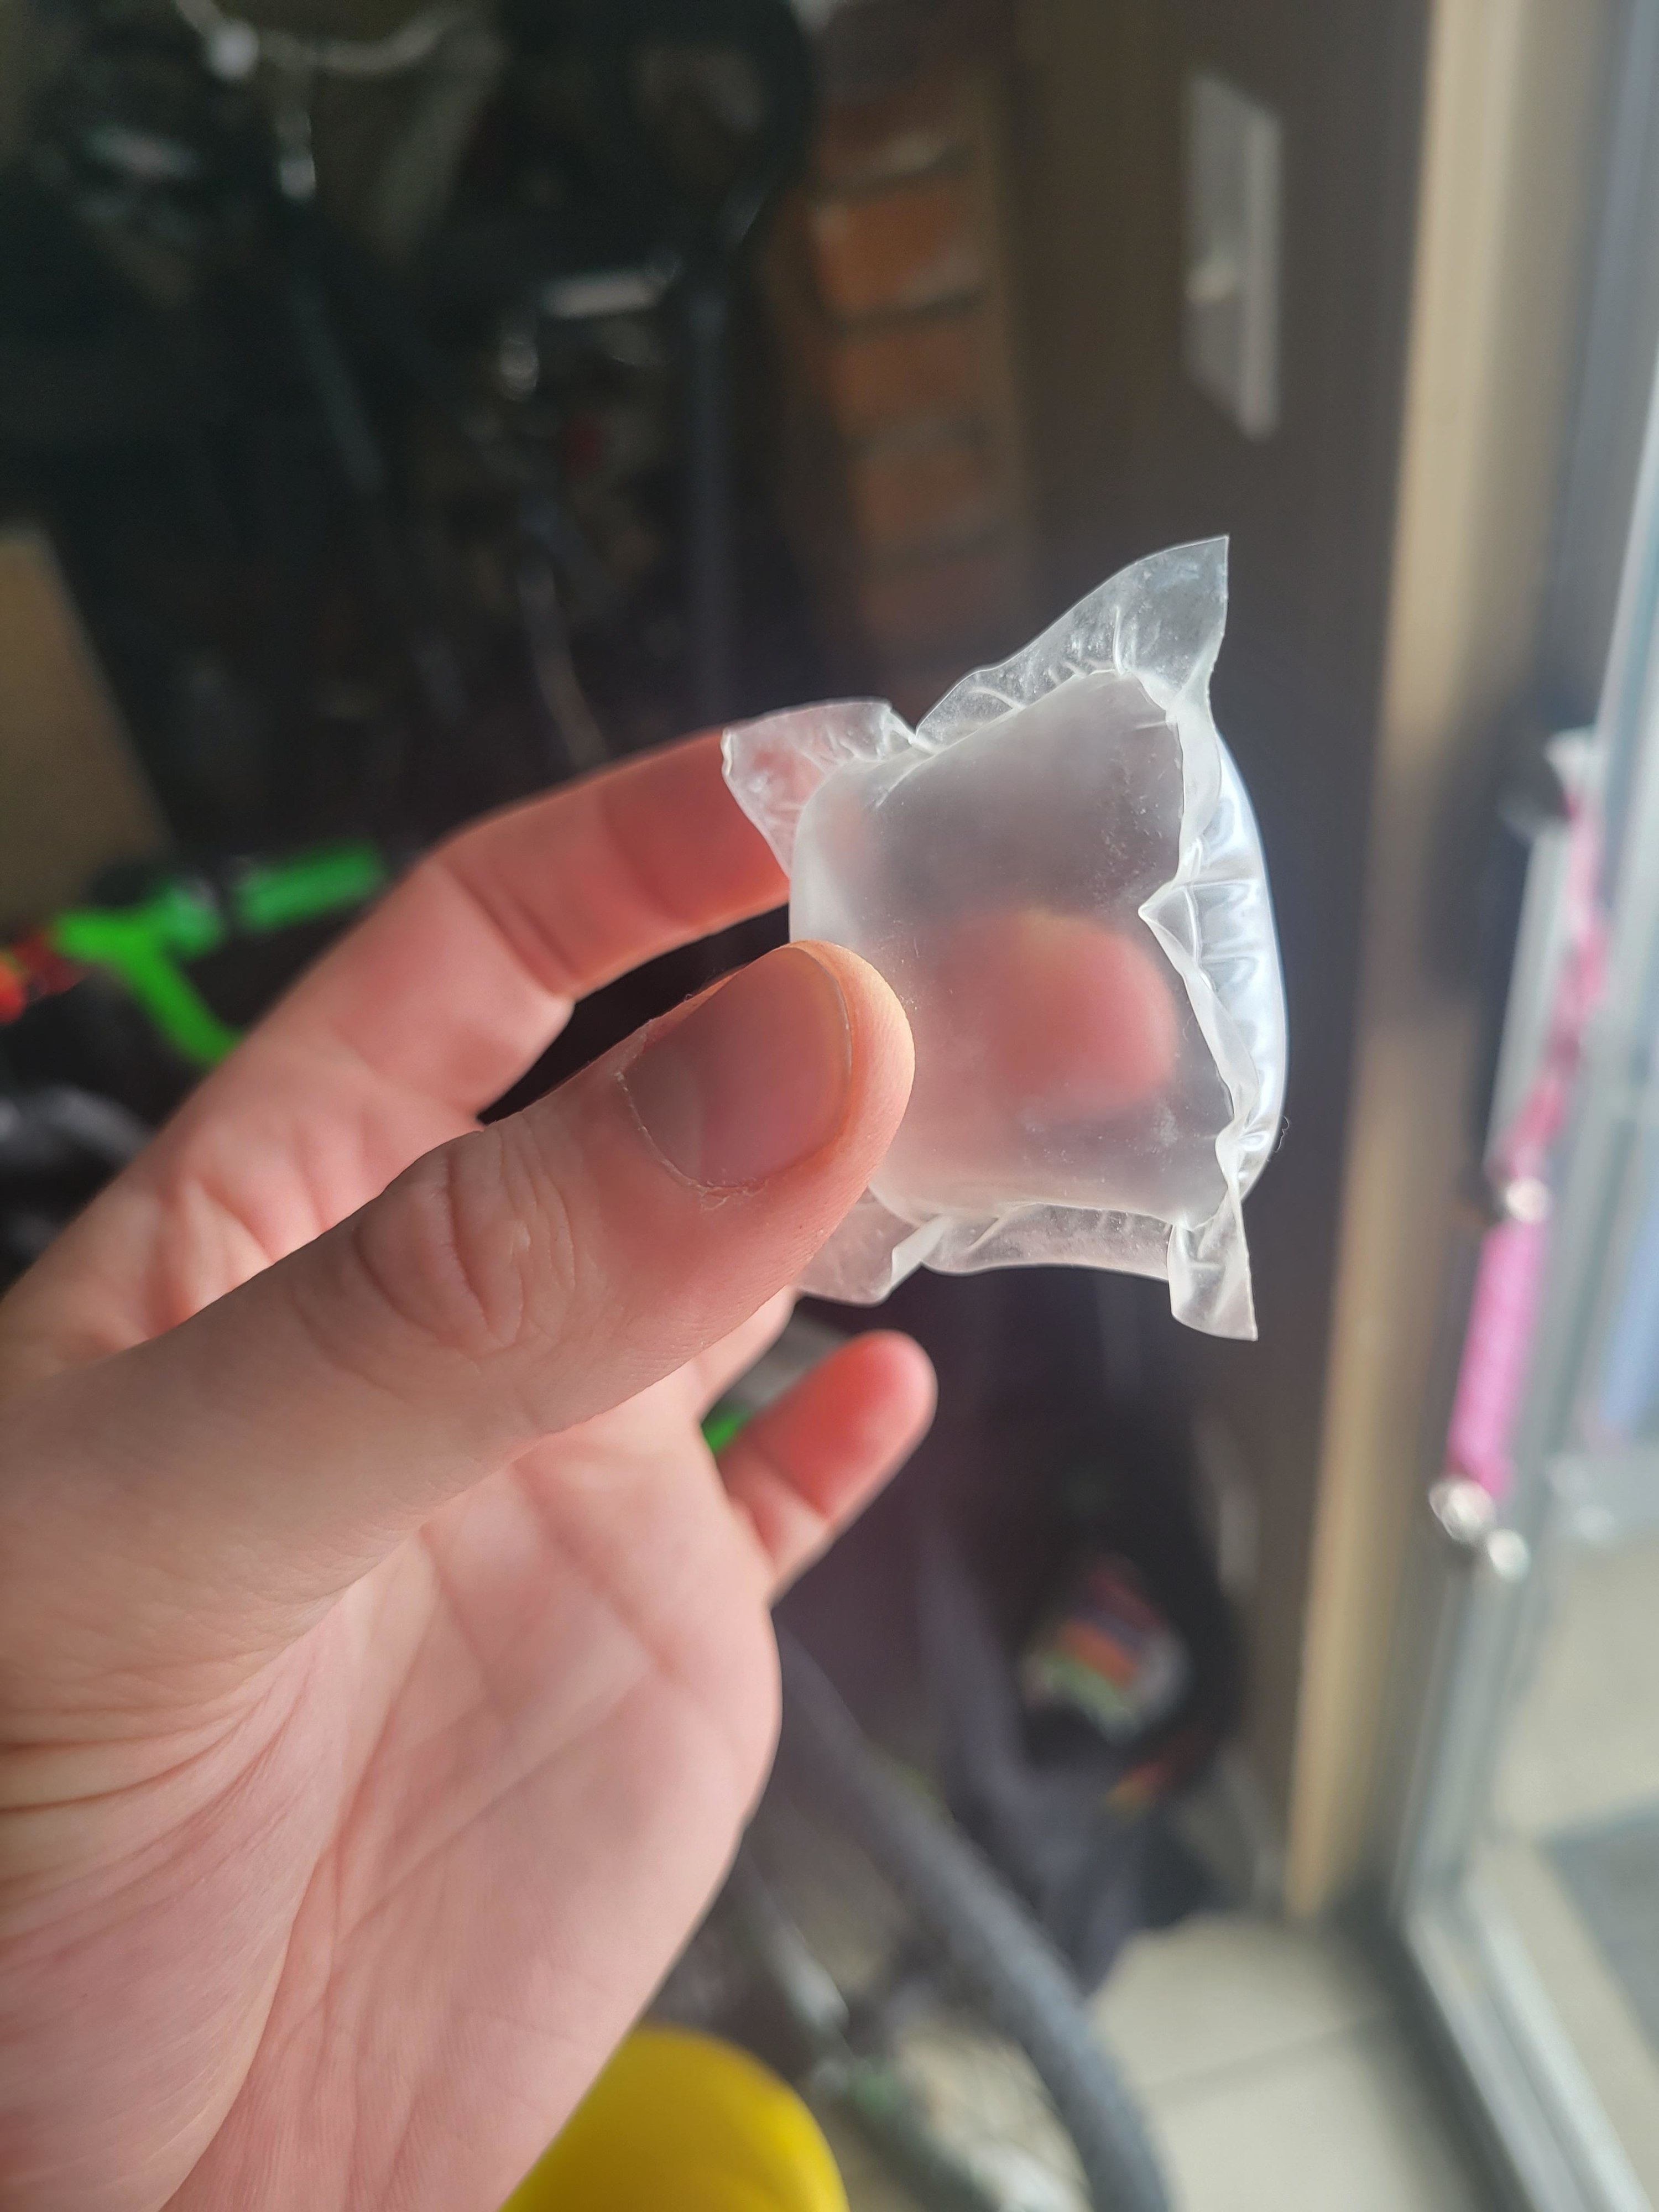 a plastic laundry pod that is empty inside, just filled with air